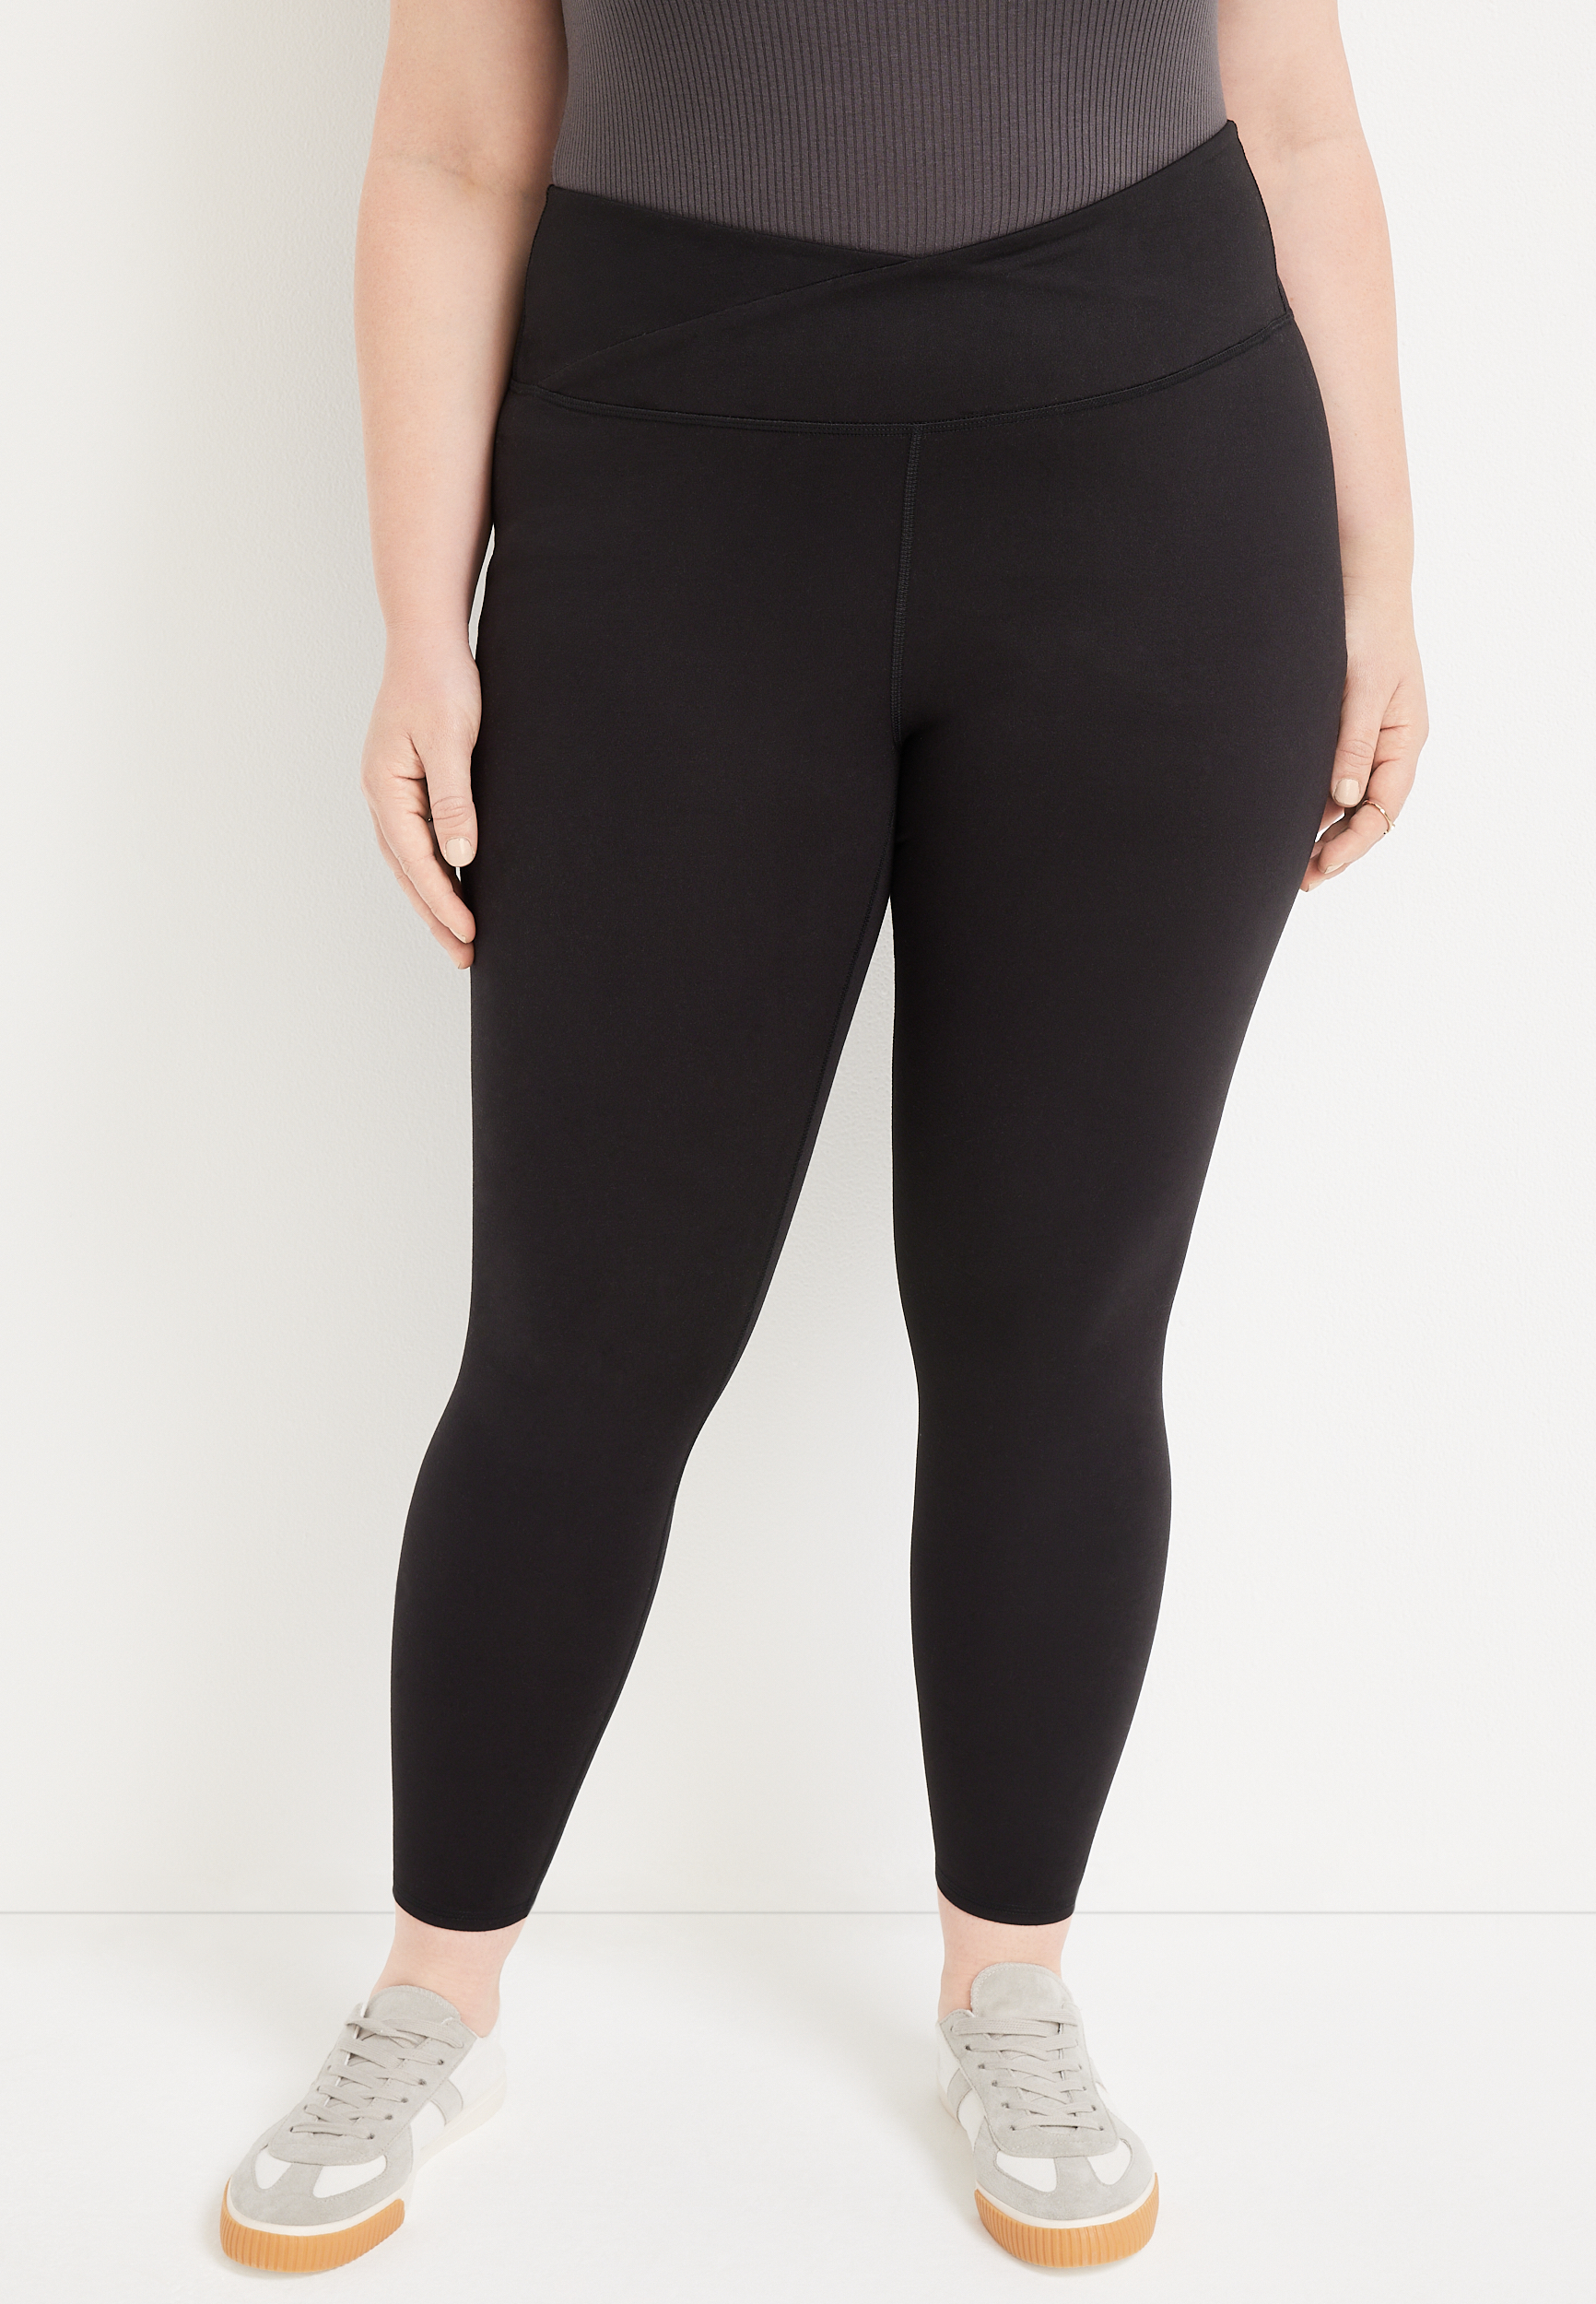 Black Buttery Soft Leggings - EXTRA PLUS 2X-4X, Online Store